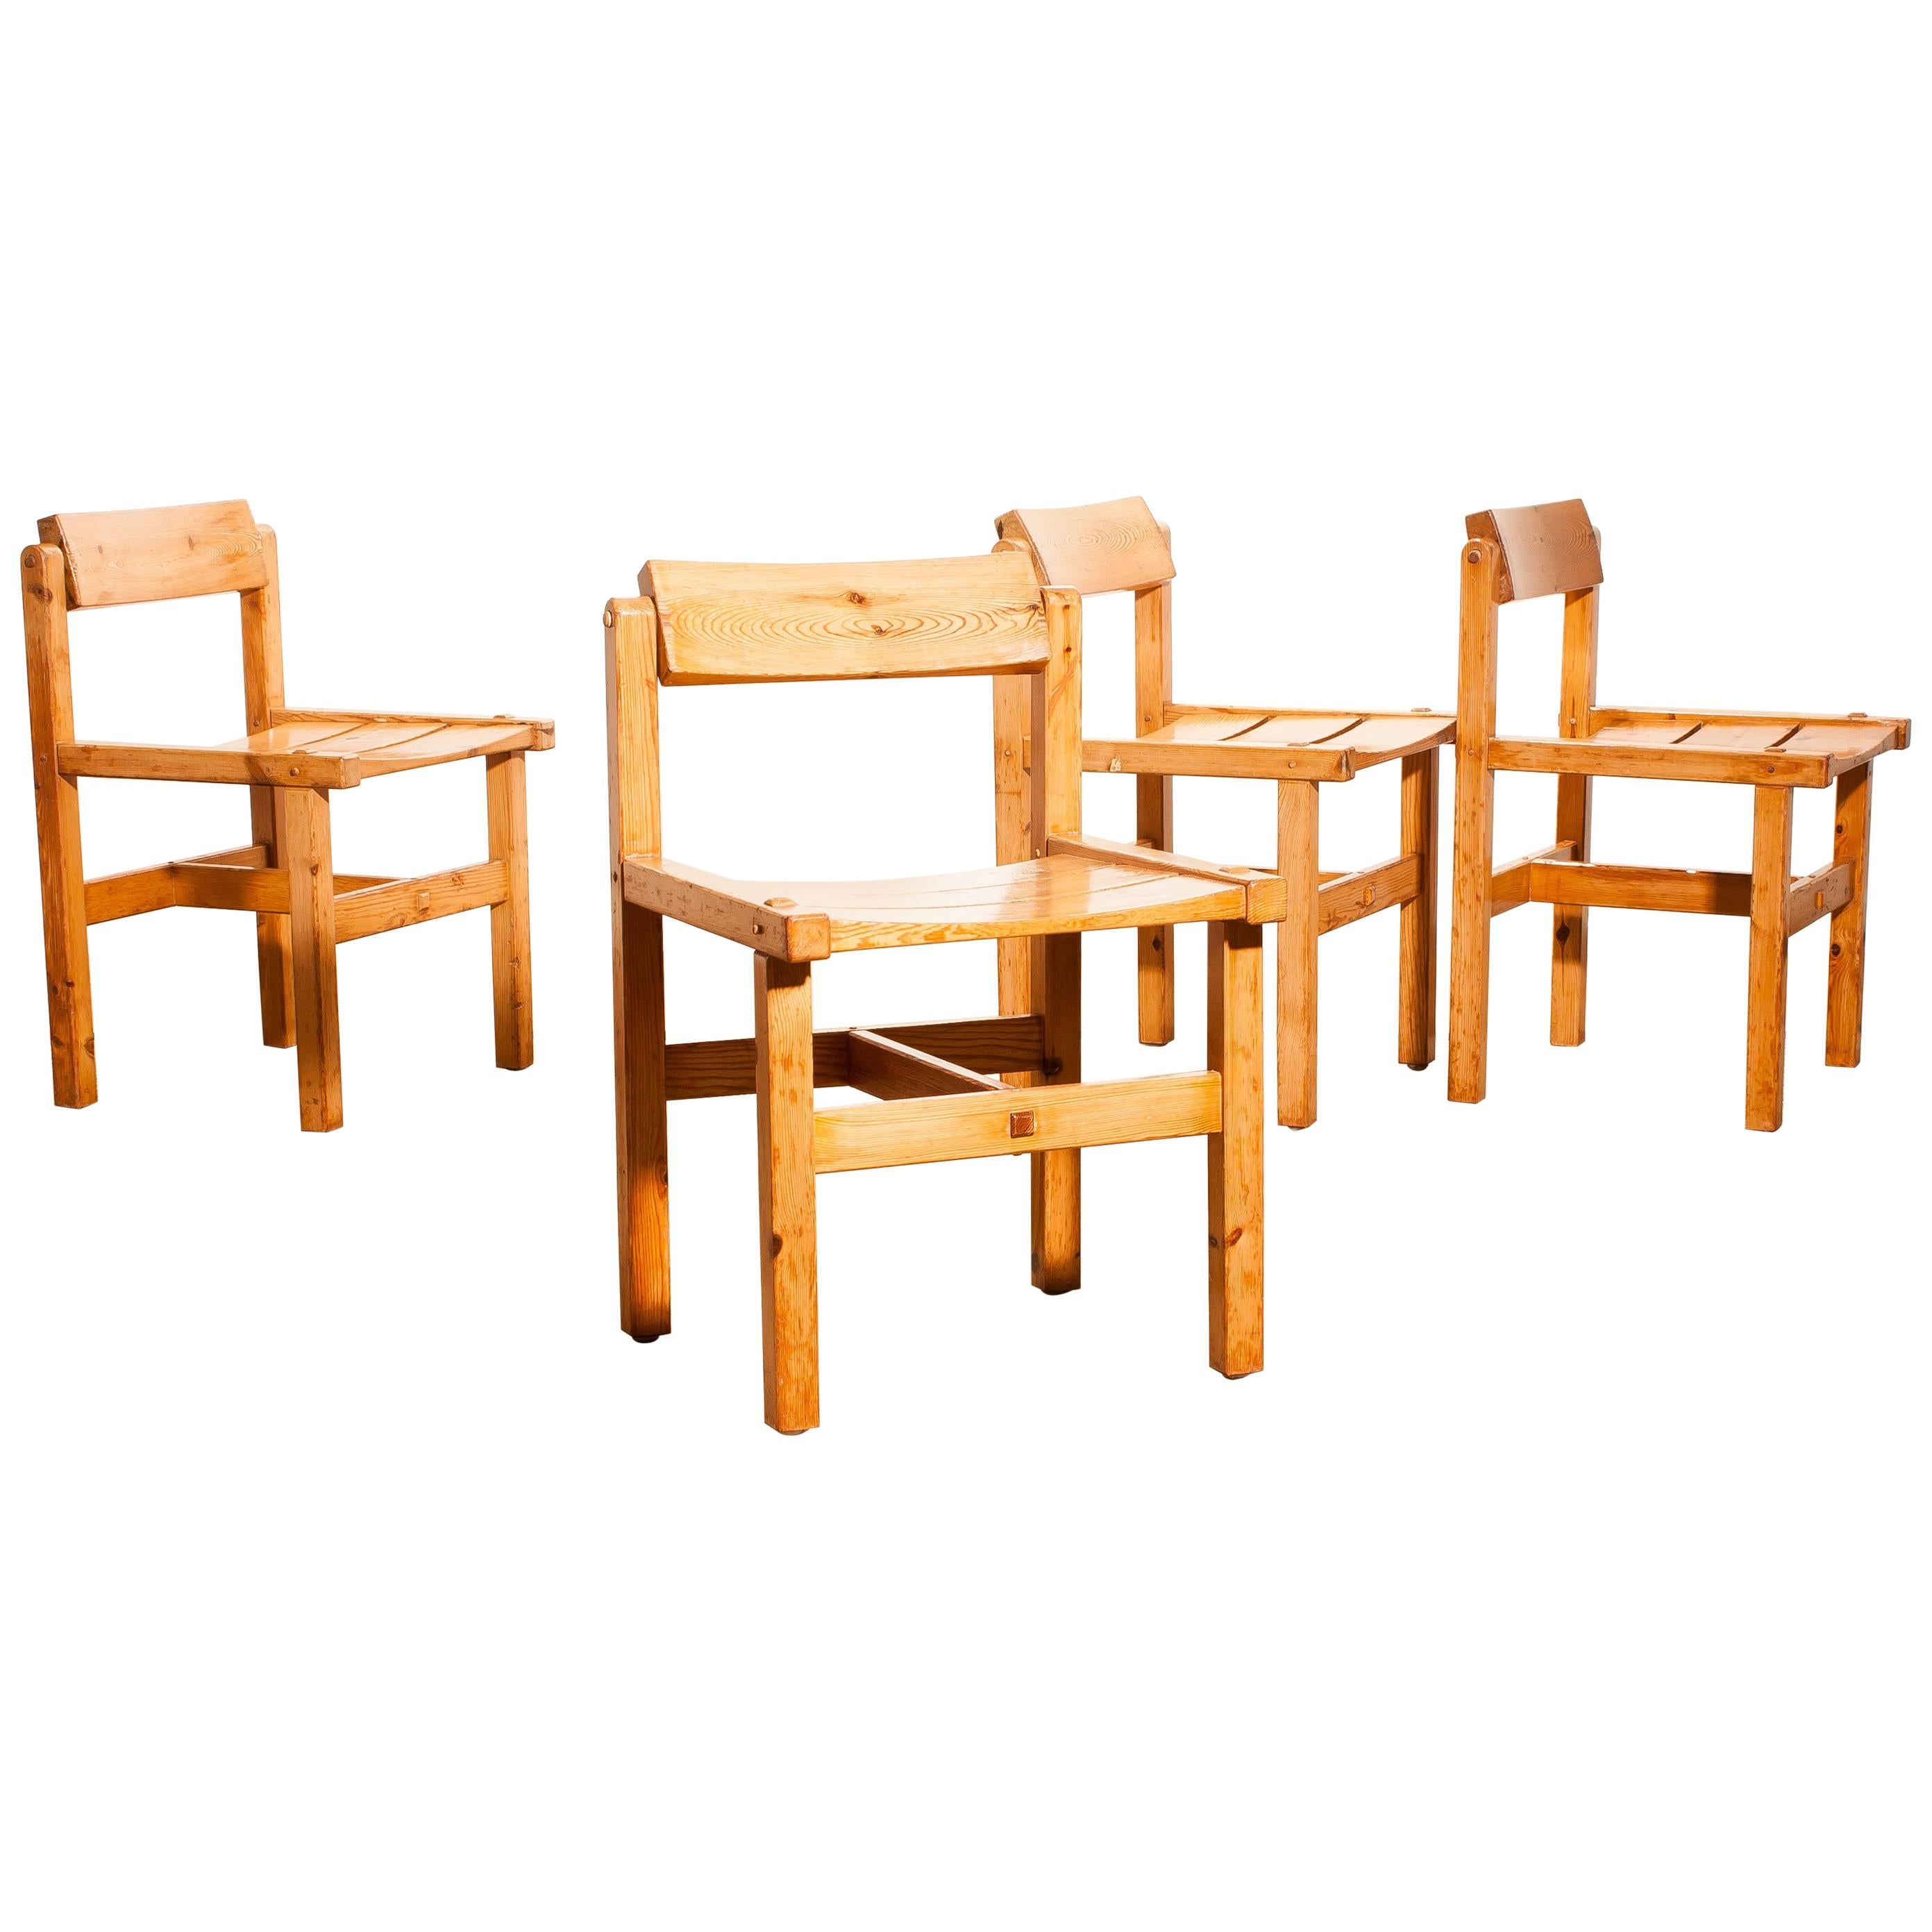 1960s, Pine Set of Four Chairs by Edvin Helseth, Norway